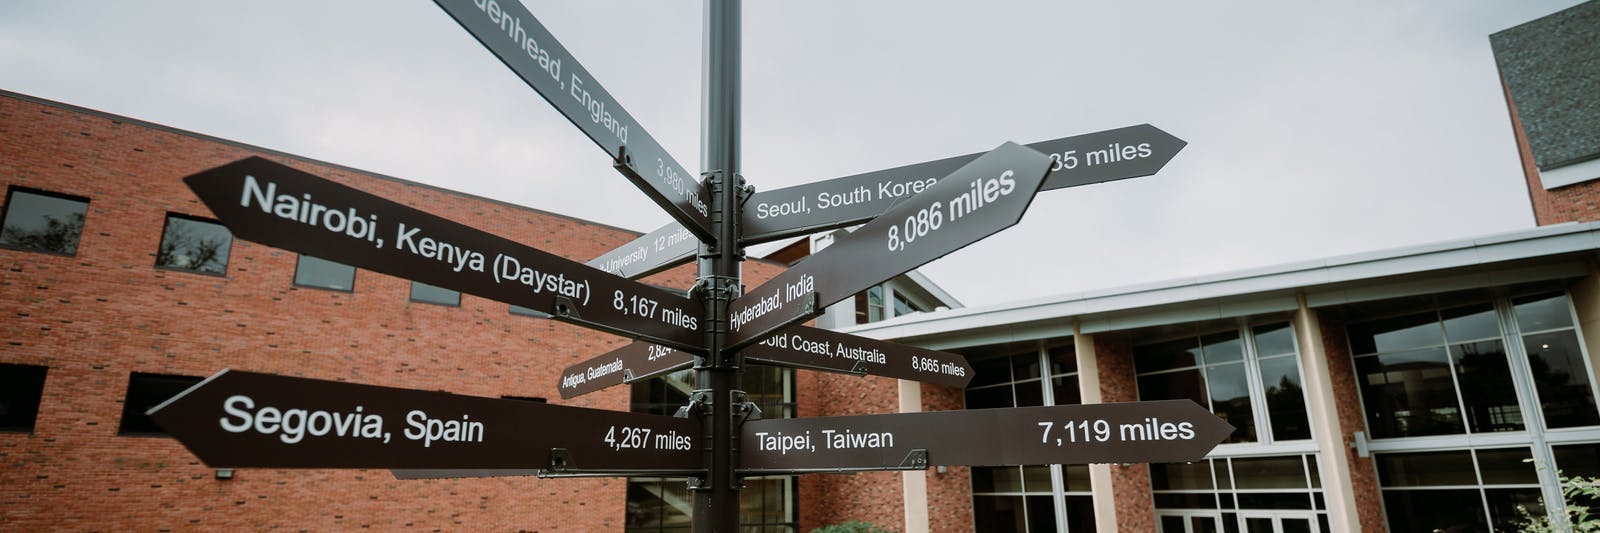 Study abroad directions pole